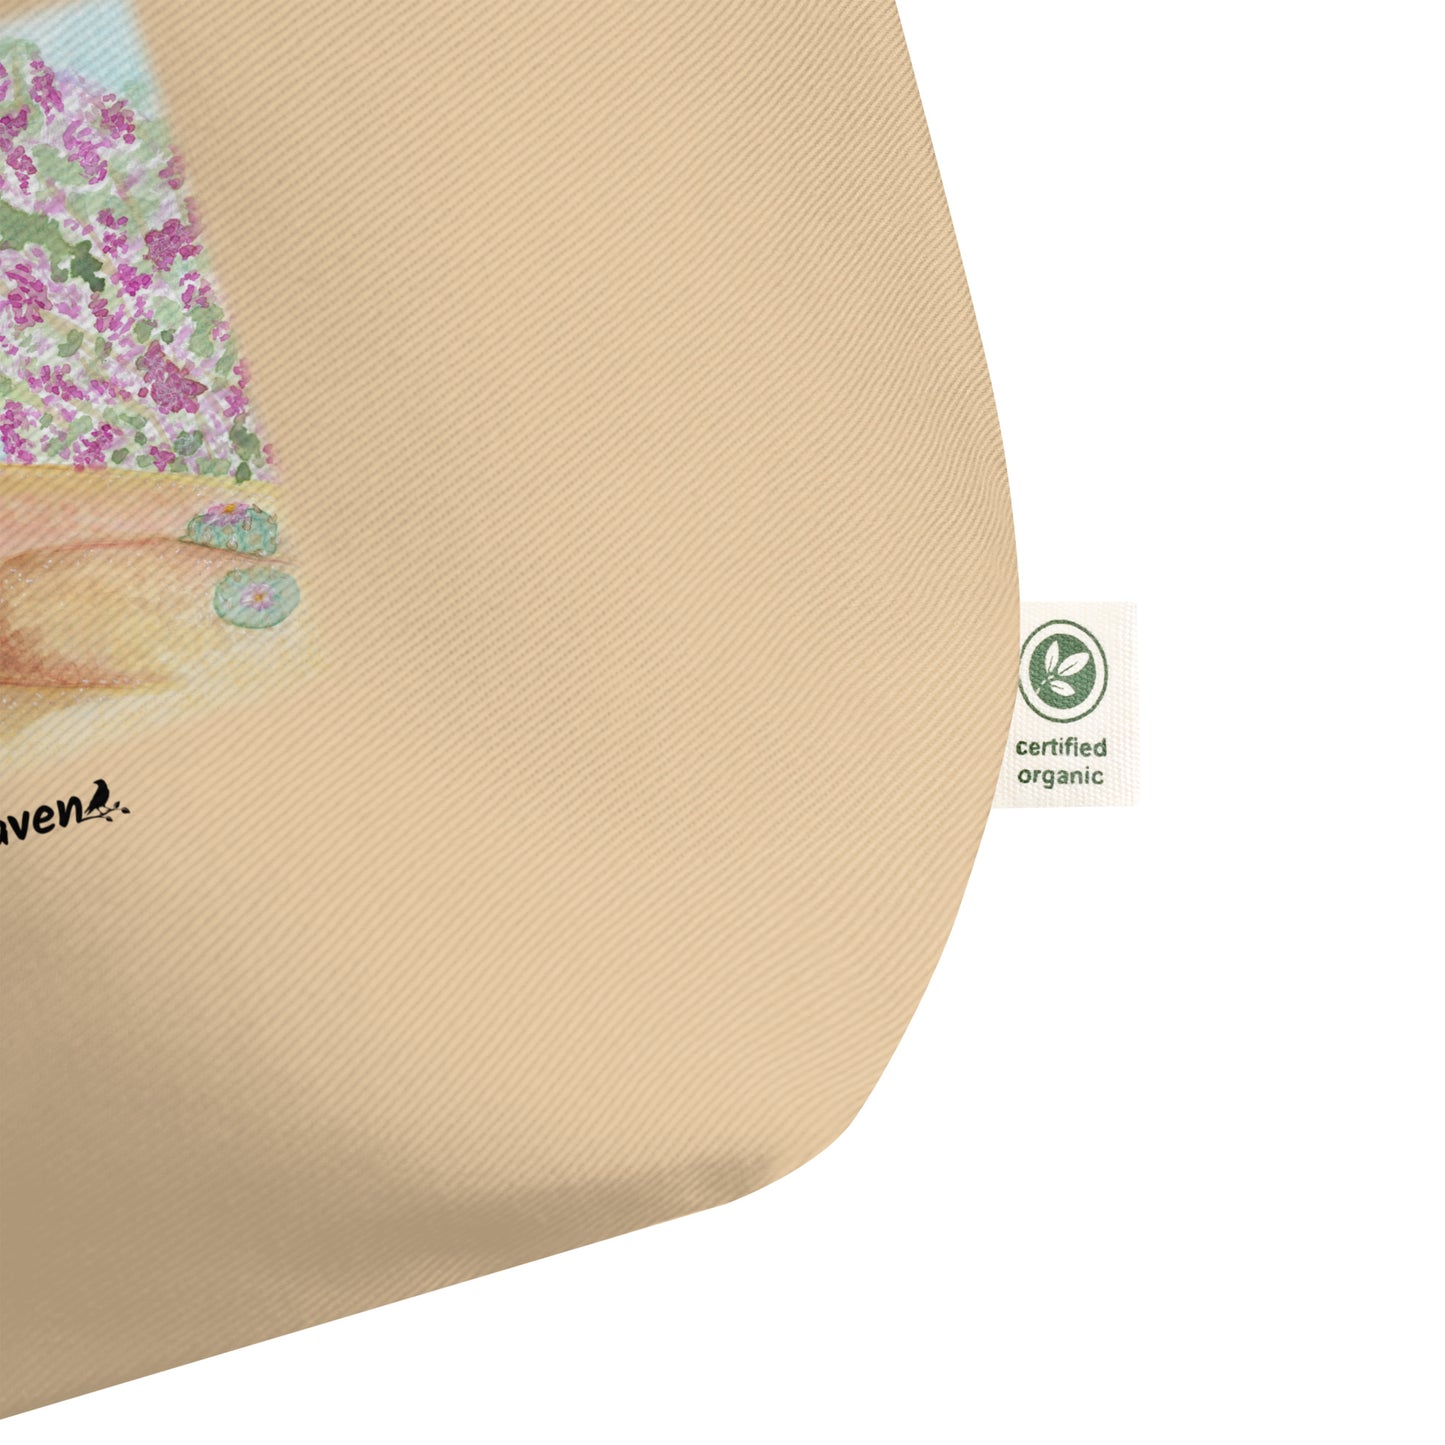 Large eco oyster-colored tote bag details. Certified Organic cotton tag.